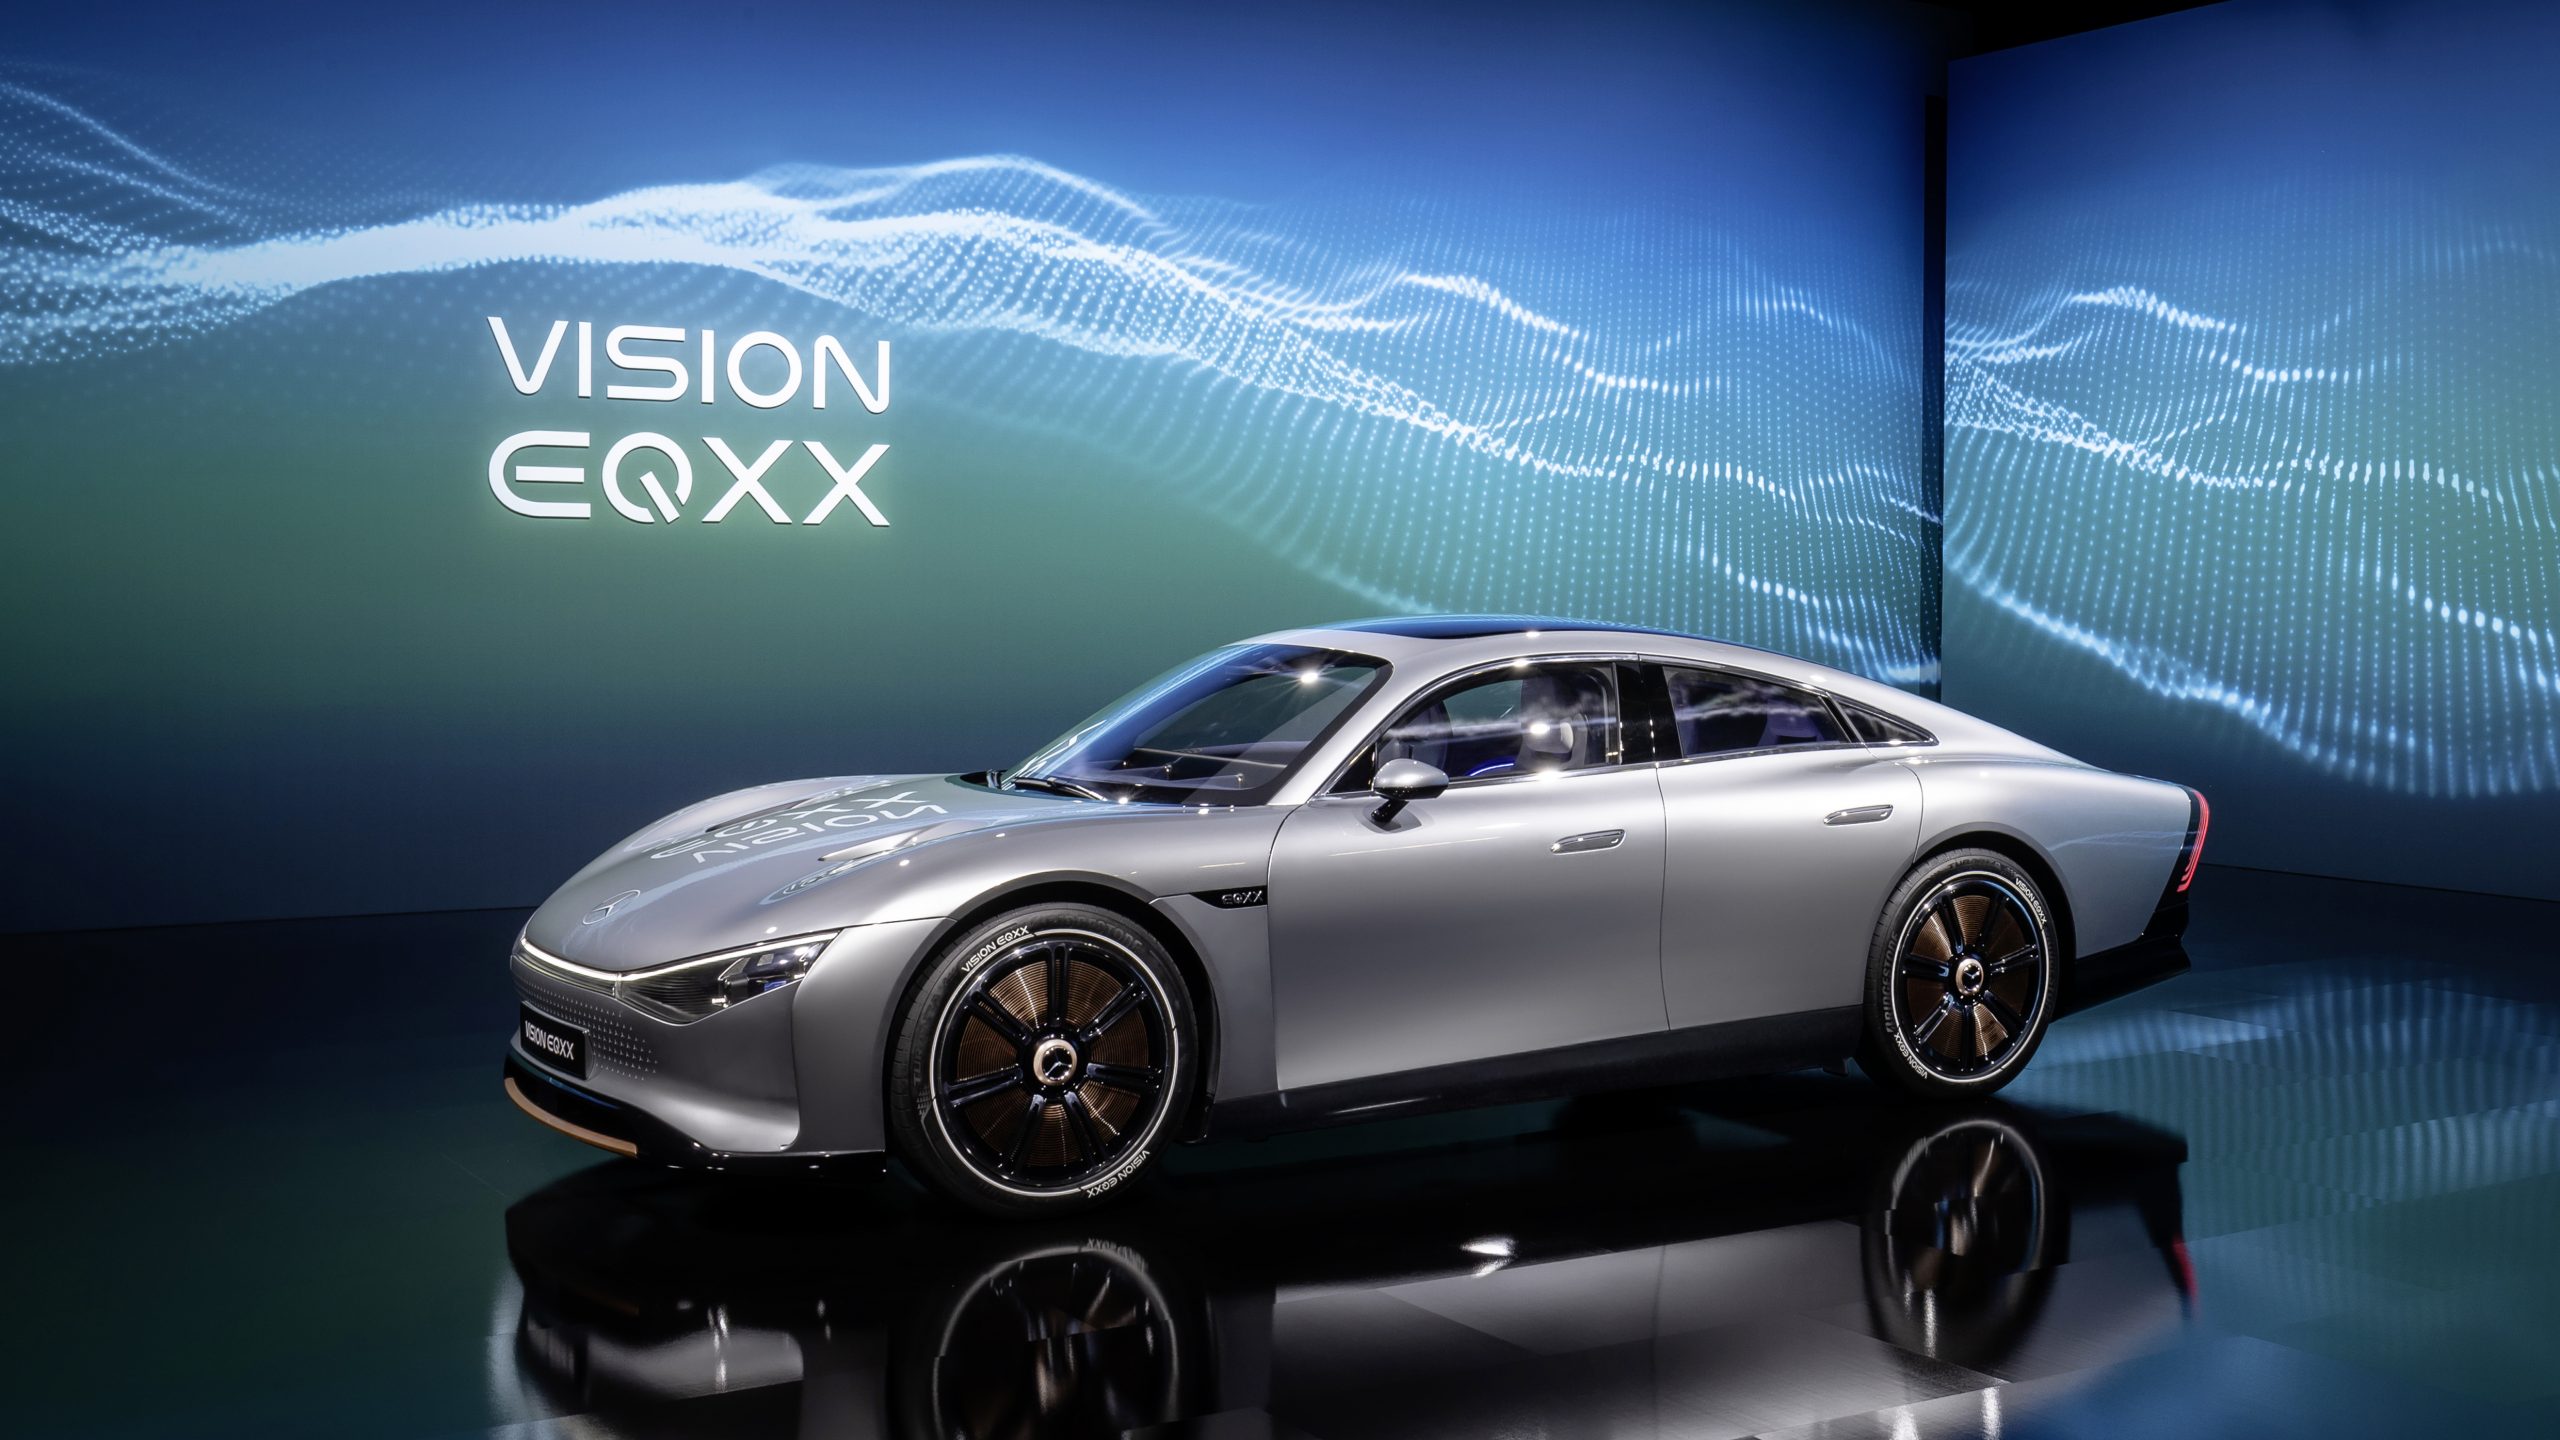 mercedes benz VISION EQXX - Everything You should know about Mercedes-Benz Vision EQXX